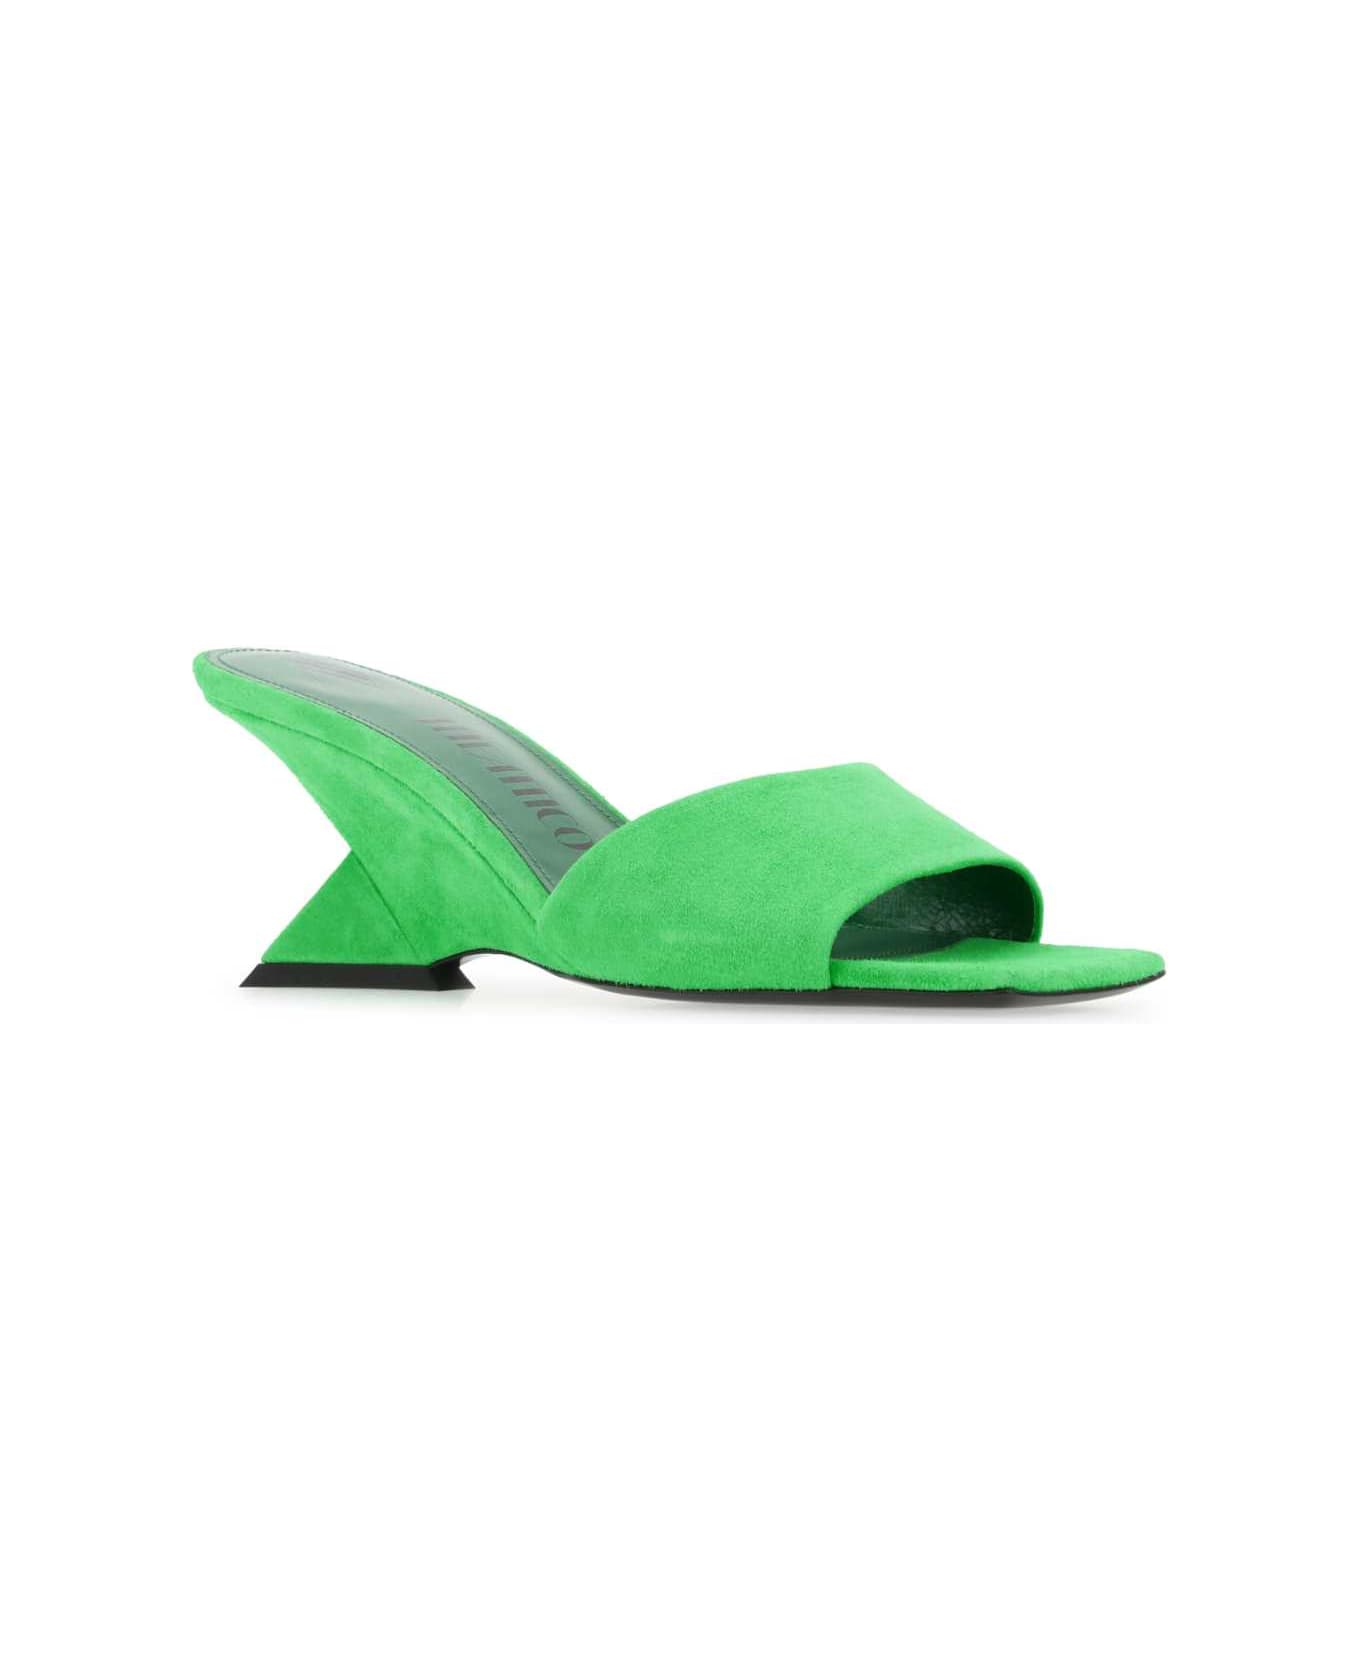 The Attico Fluo Green Suede Cheope Mules - 163 サンダル